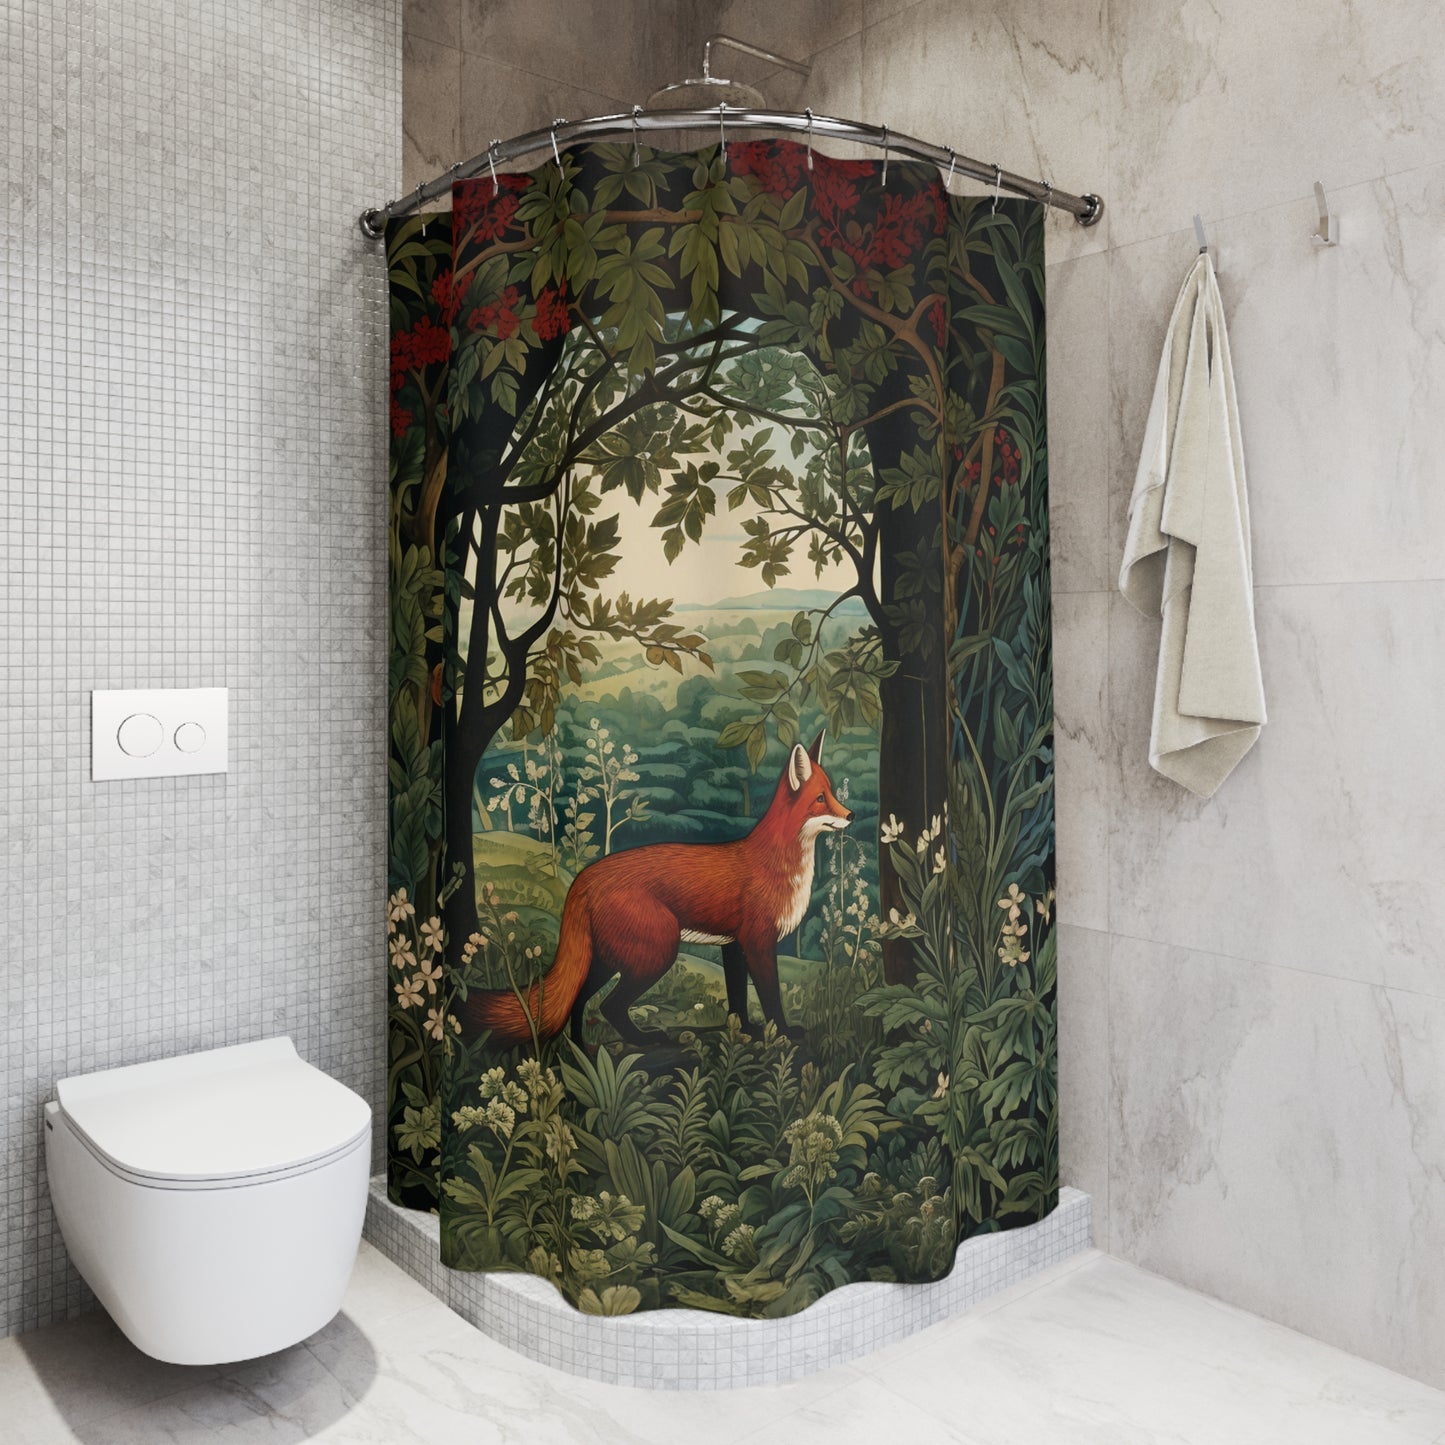 Enchanted Fox in Forest Shower Curtain, William Morris Inspired, Farmhouse Bathroom, Floral Shower Curtain, 71" x 74"